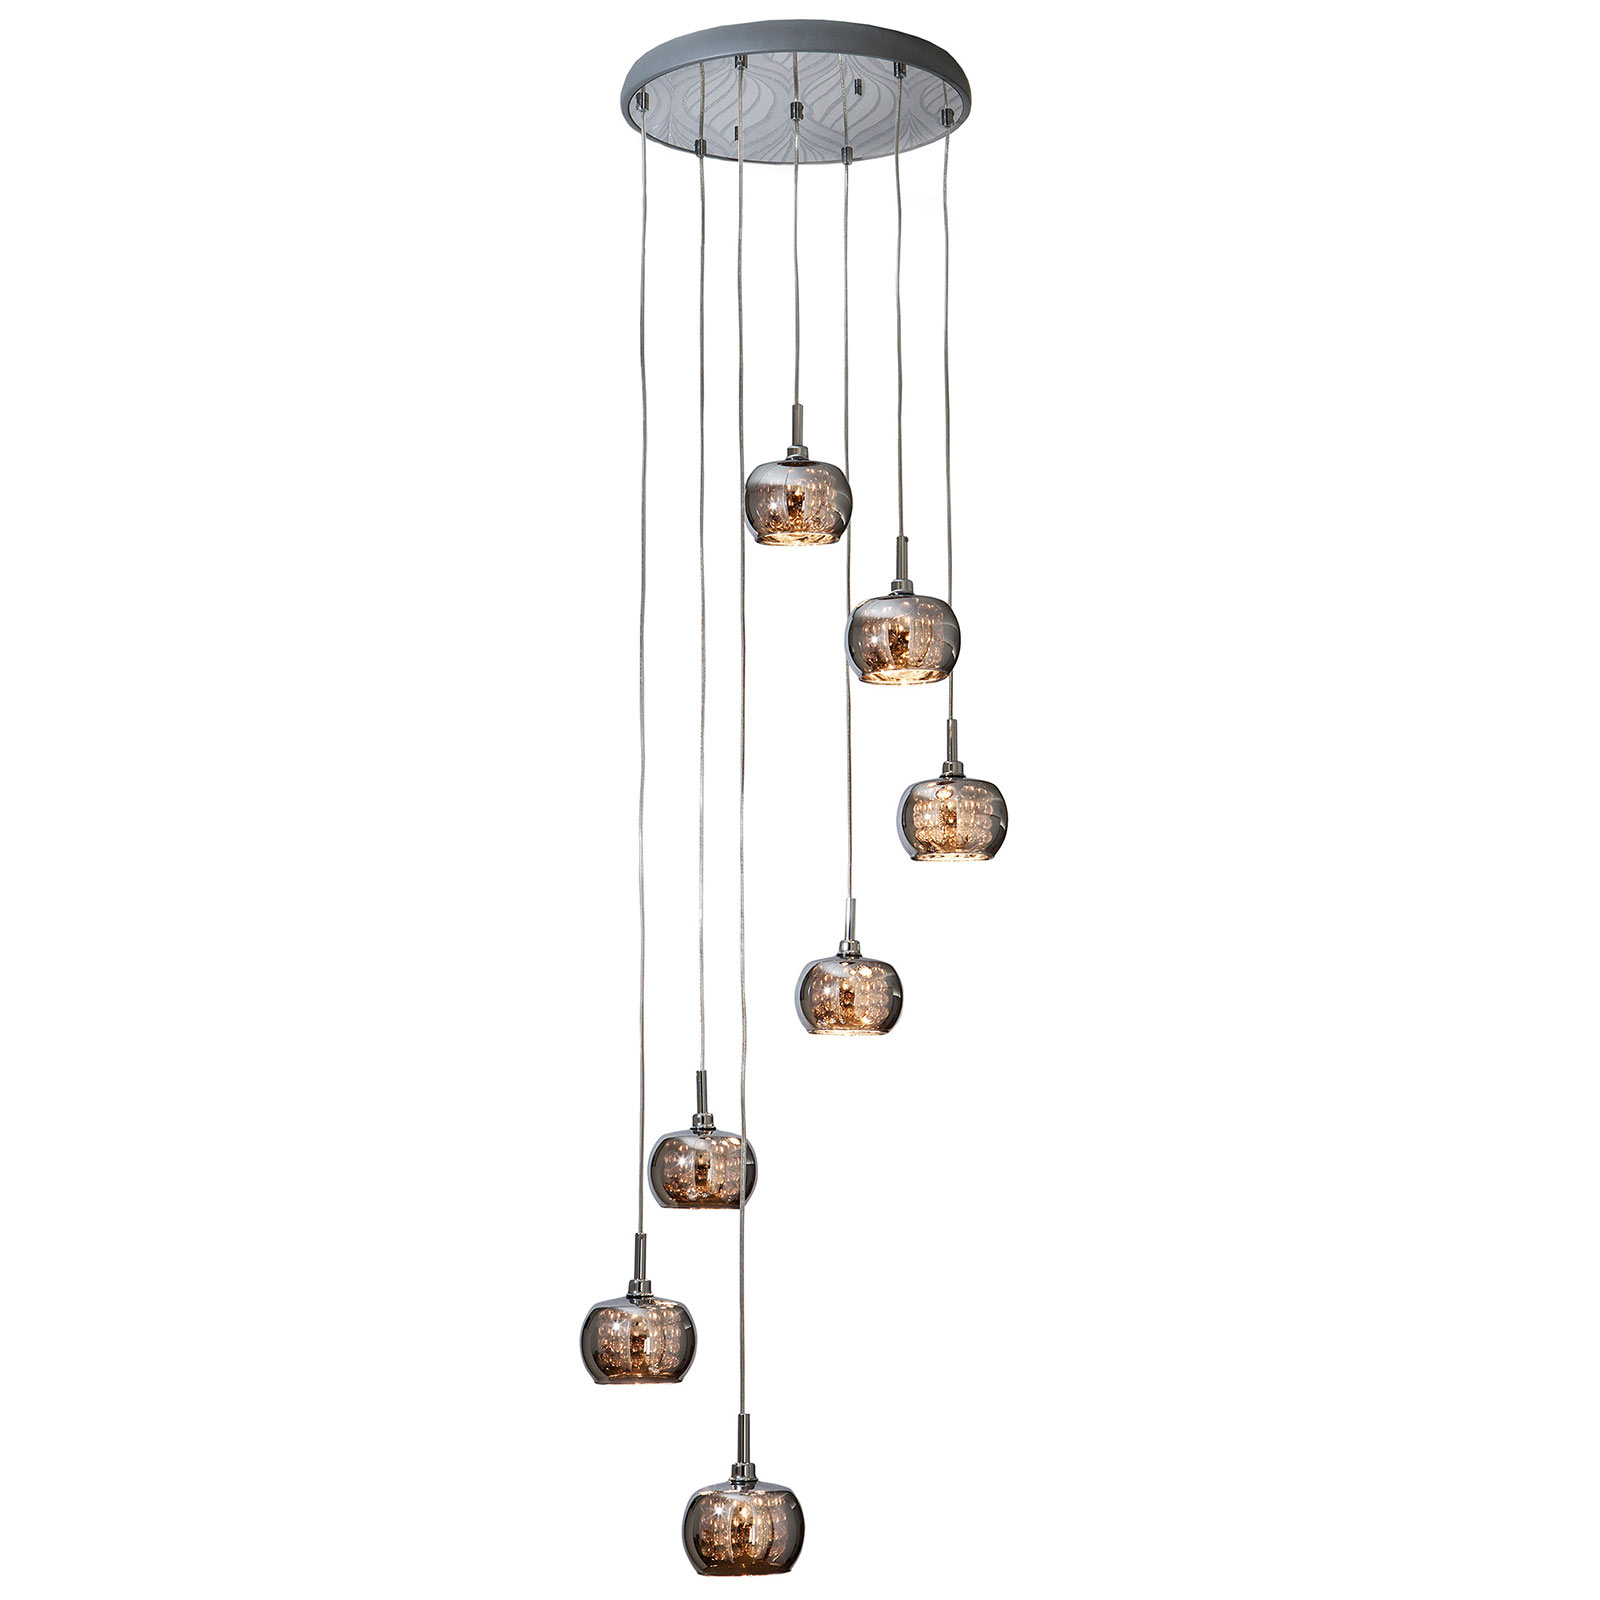 Arian LED hanging light with crystals, 7-bulb